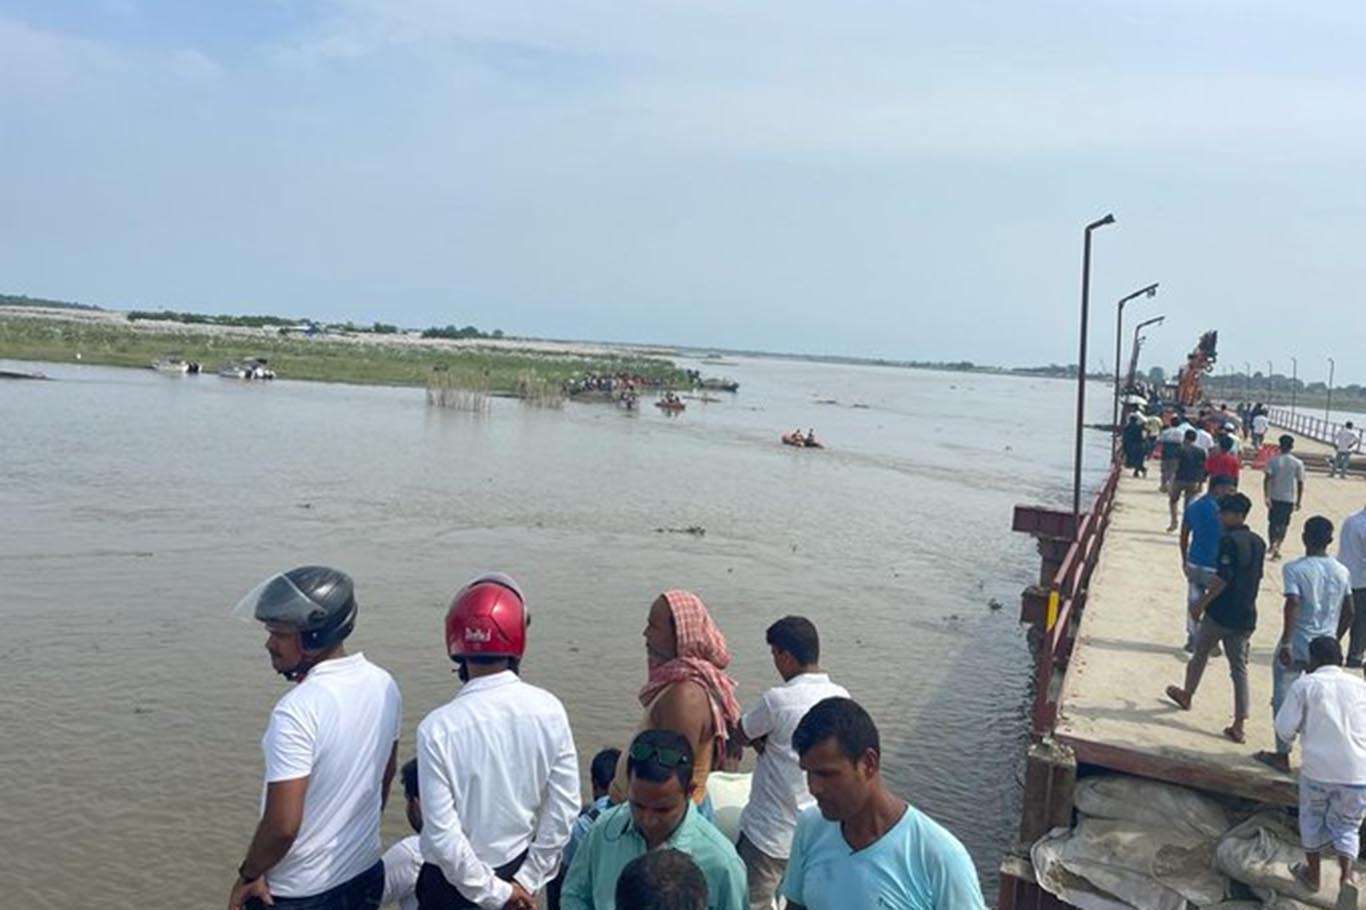 10 missing in India boat accident